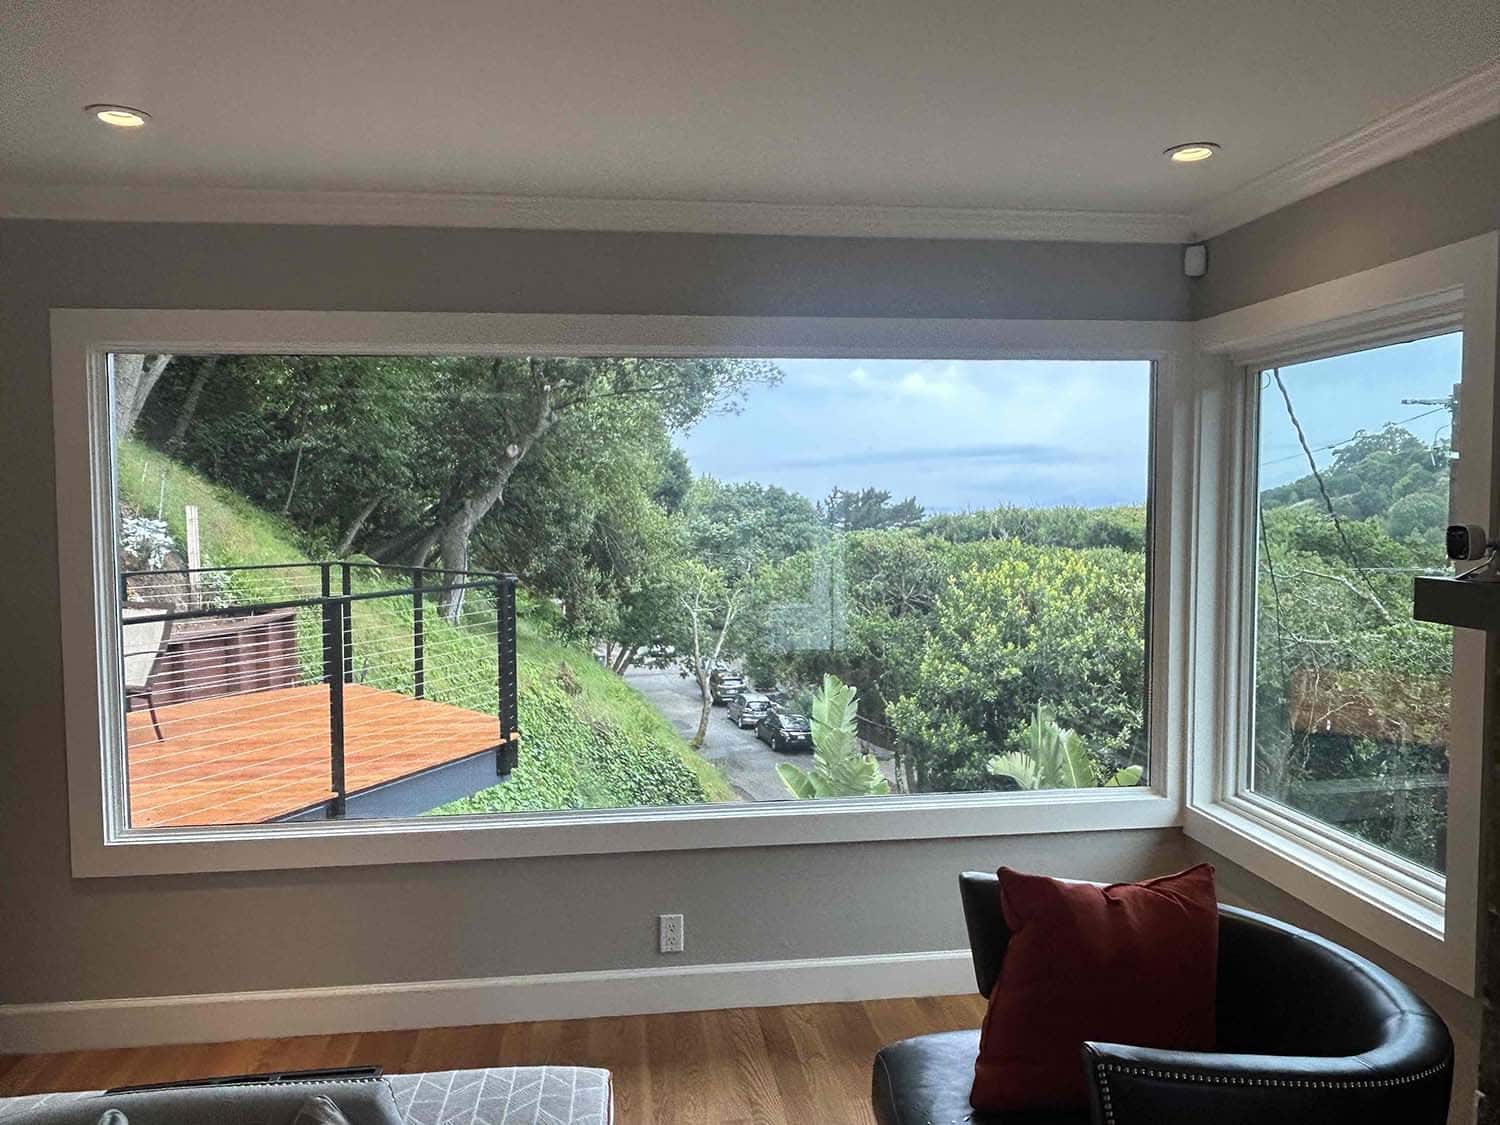 Heat Control Window Film for a Berkeley, CA Home. Installed by ClimatePro.